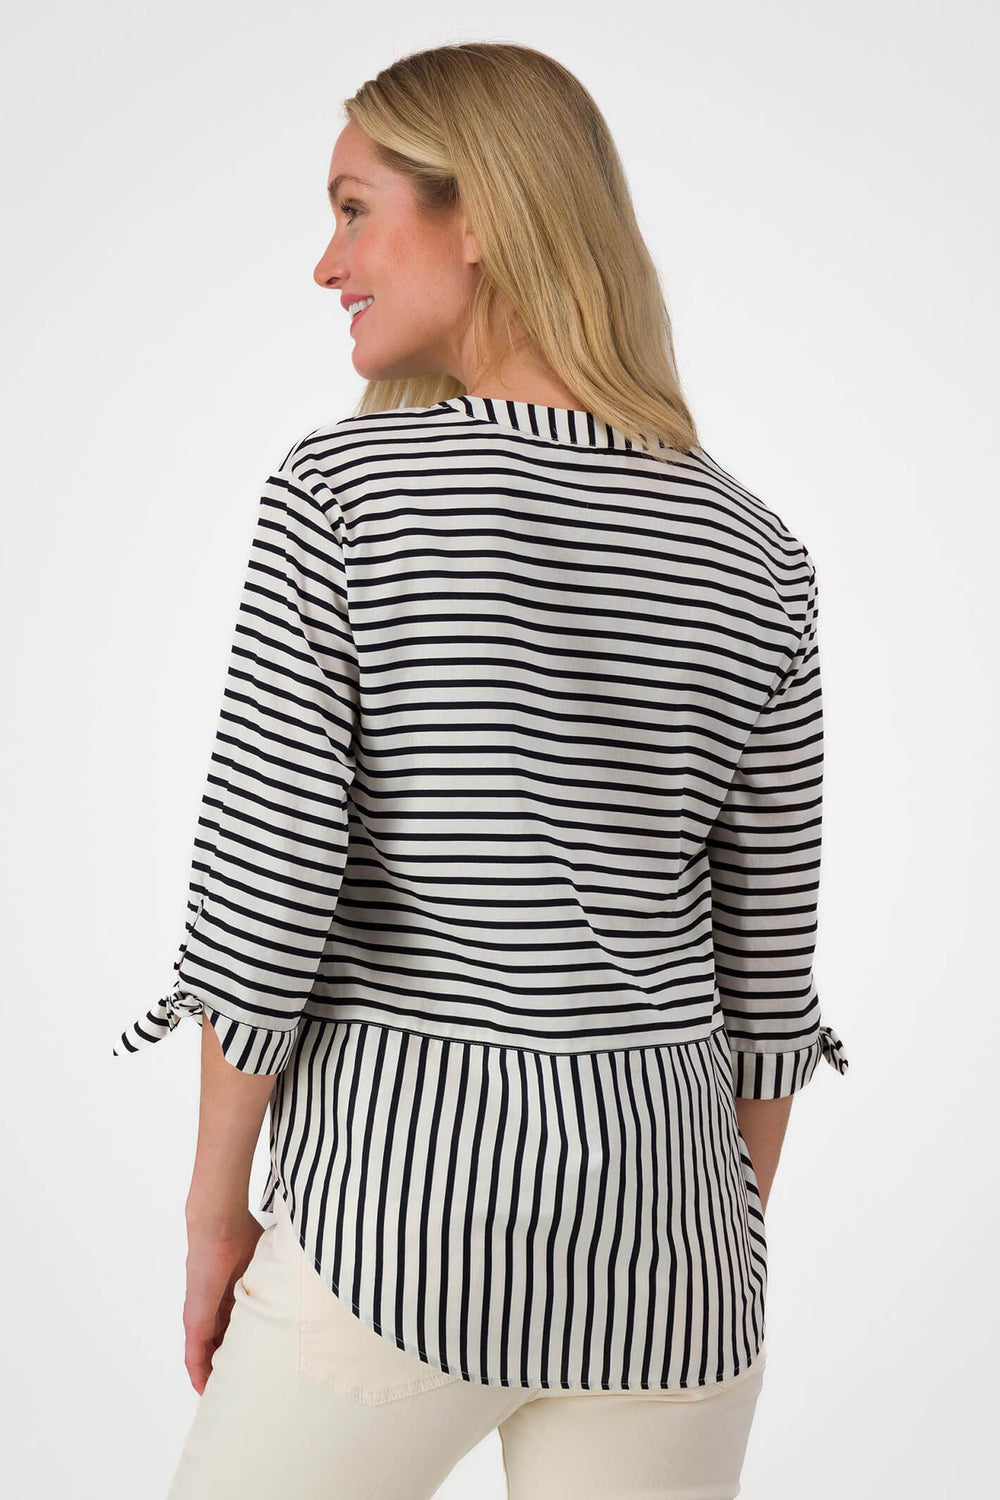 Just White J2972 Navy Stripe Blouse - Experience Boutique